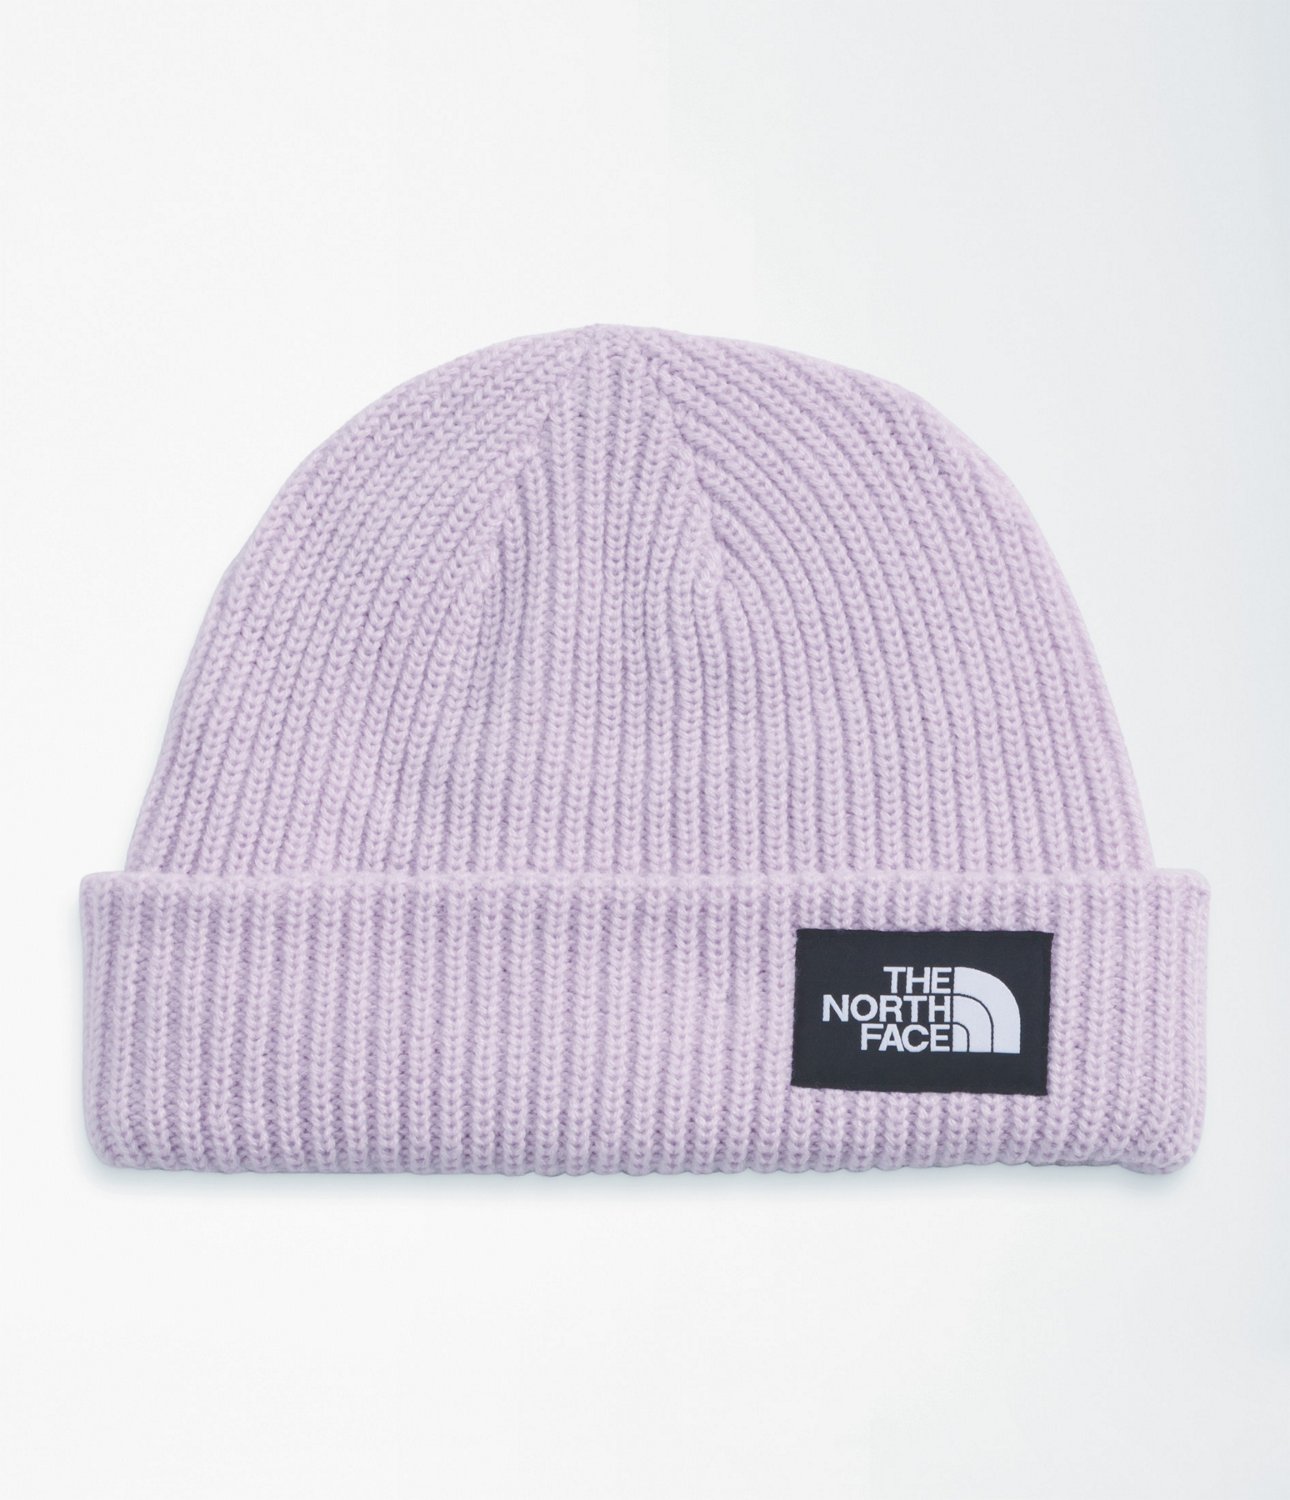 The North Face Men's Salty Lined Beanie | Academy